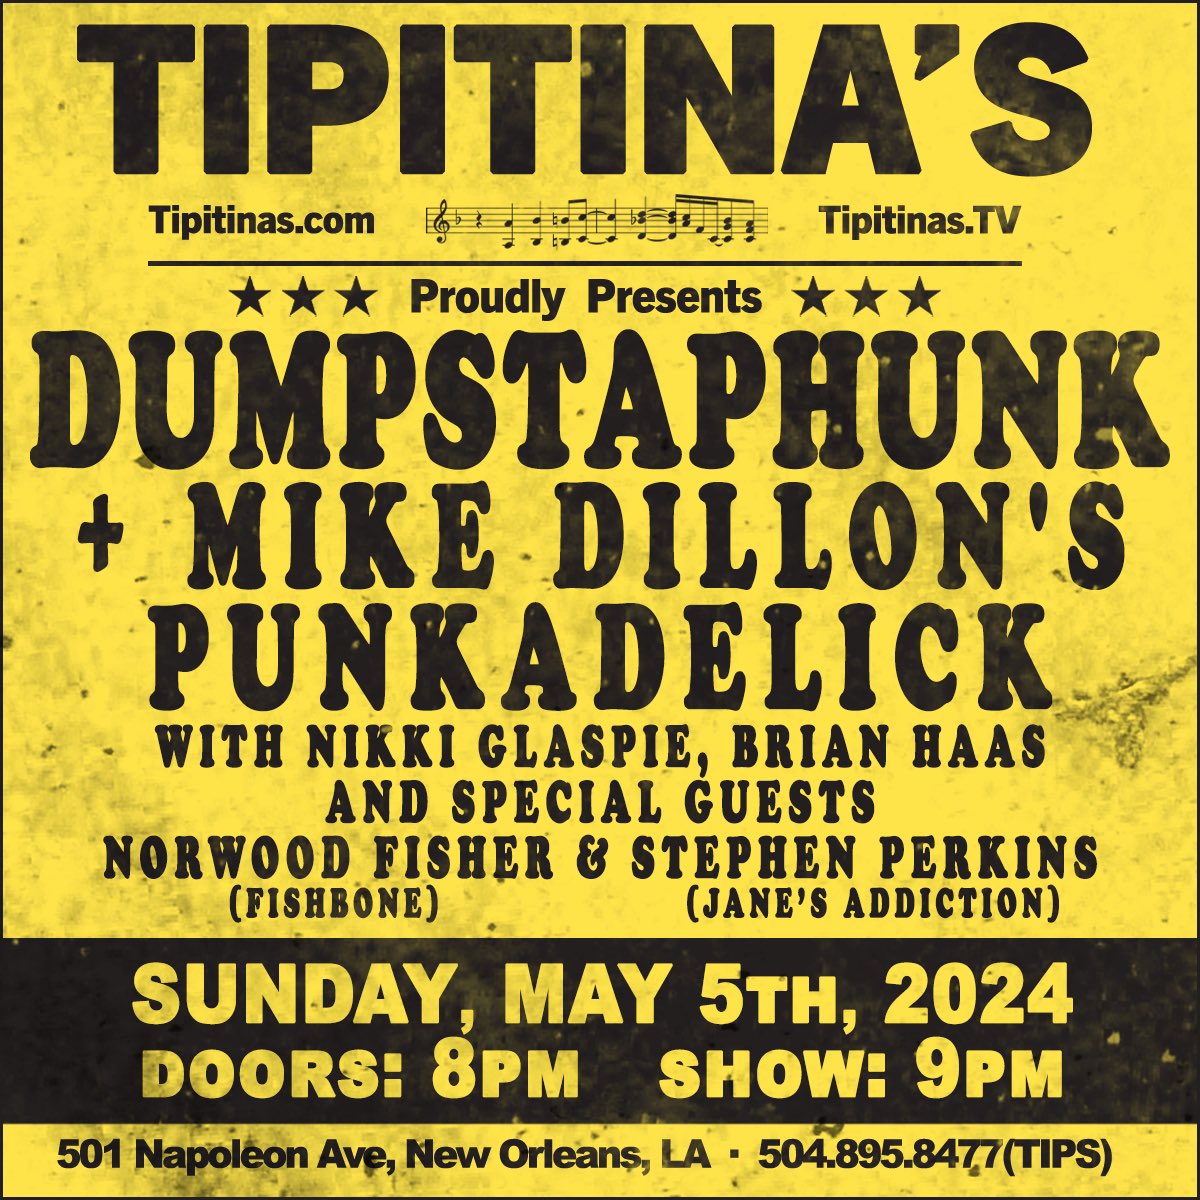 ⚜️ We’re less then 1 month away until we close out #Jazzfest, Sunday, May 5th at Tipitina’s with special guests Mike Dillon's Punkadelick, Nikki Glaspie, Brian Haas, Norwood Fisher and Stephen Perkins!! 🎫 Don’t miss out ya’ll: shorturl.at/rtNZ2!!!